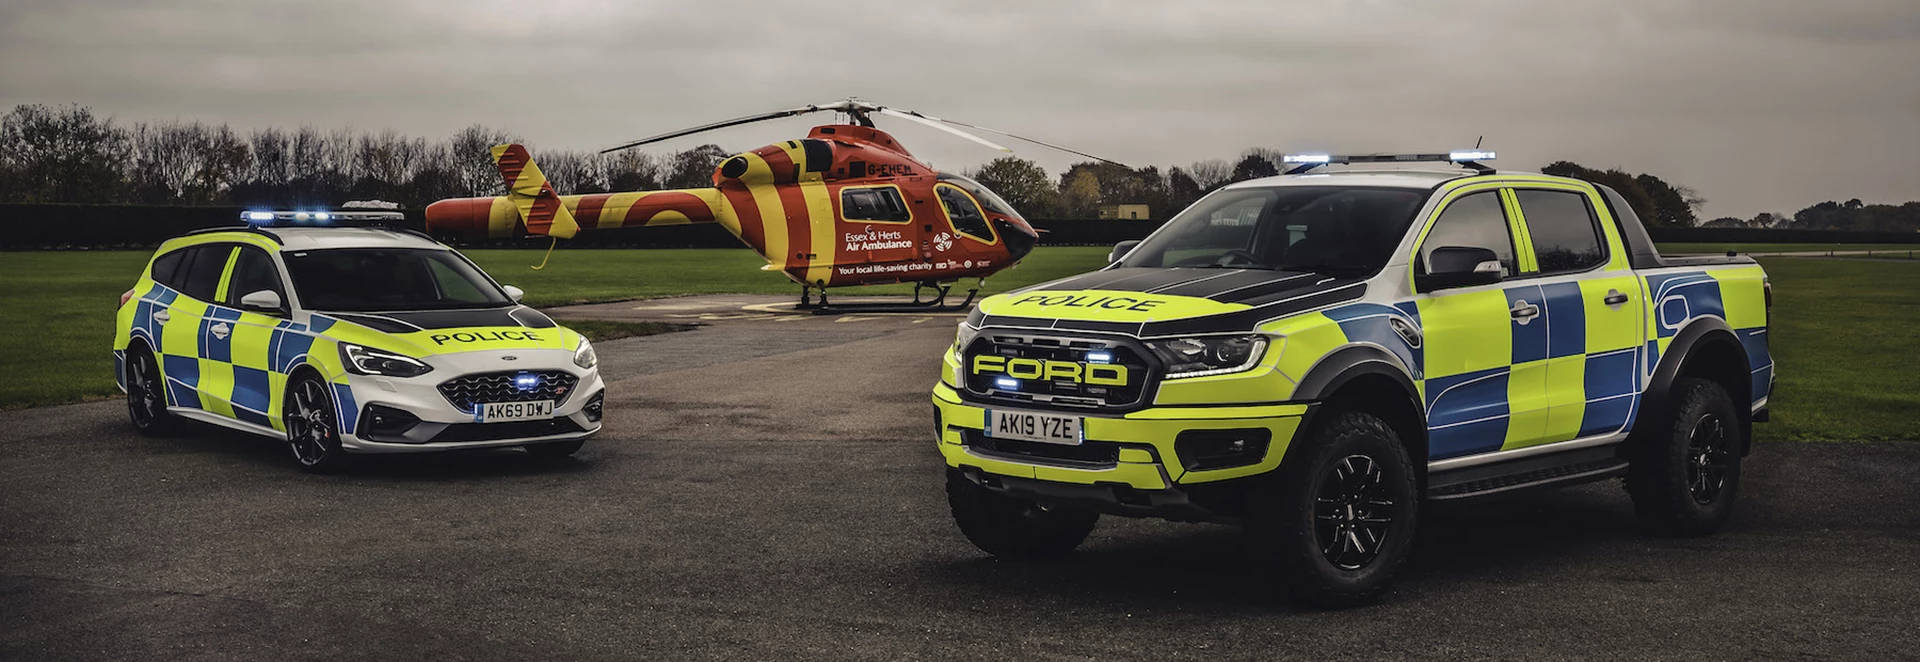 UK police forces to trial Ford performance models